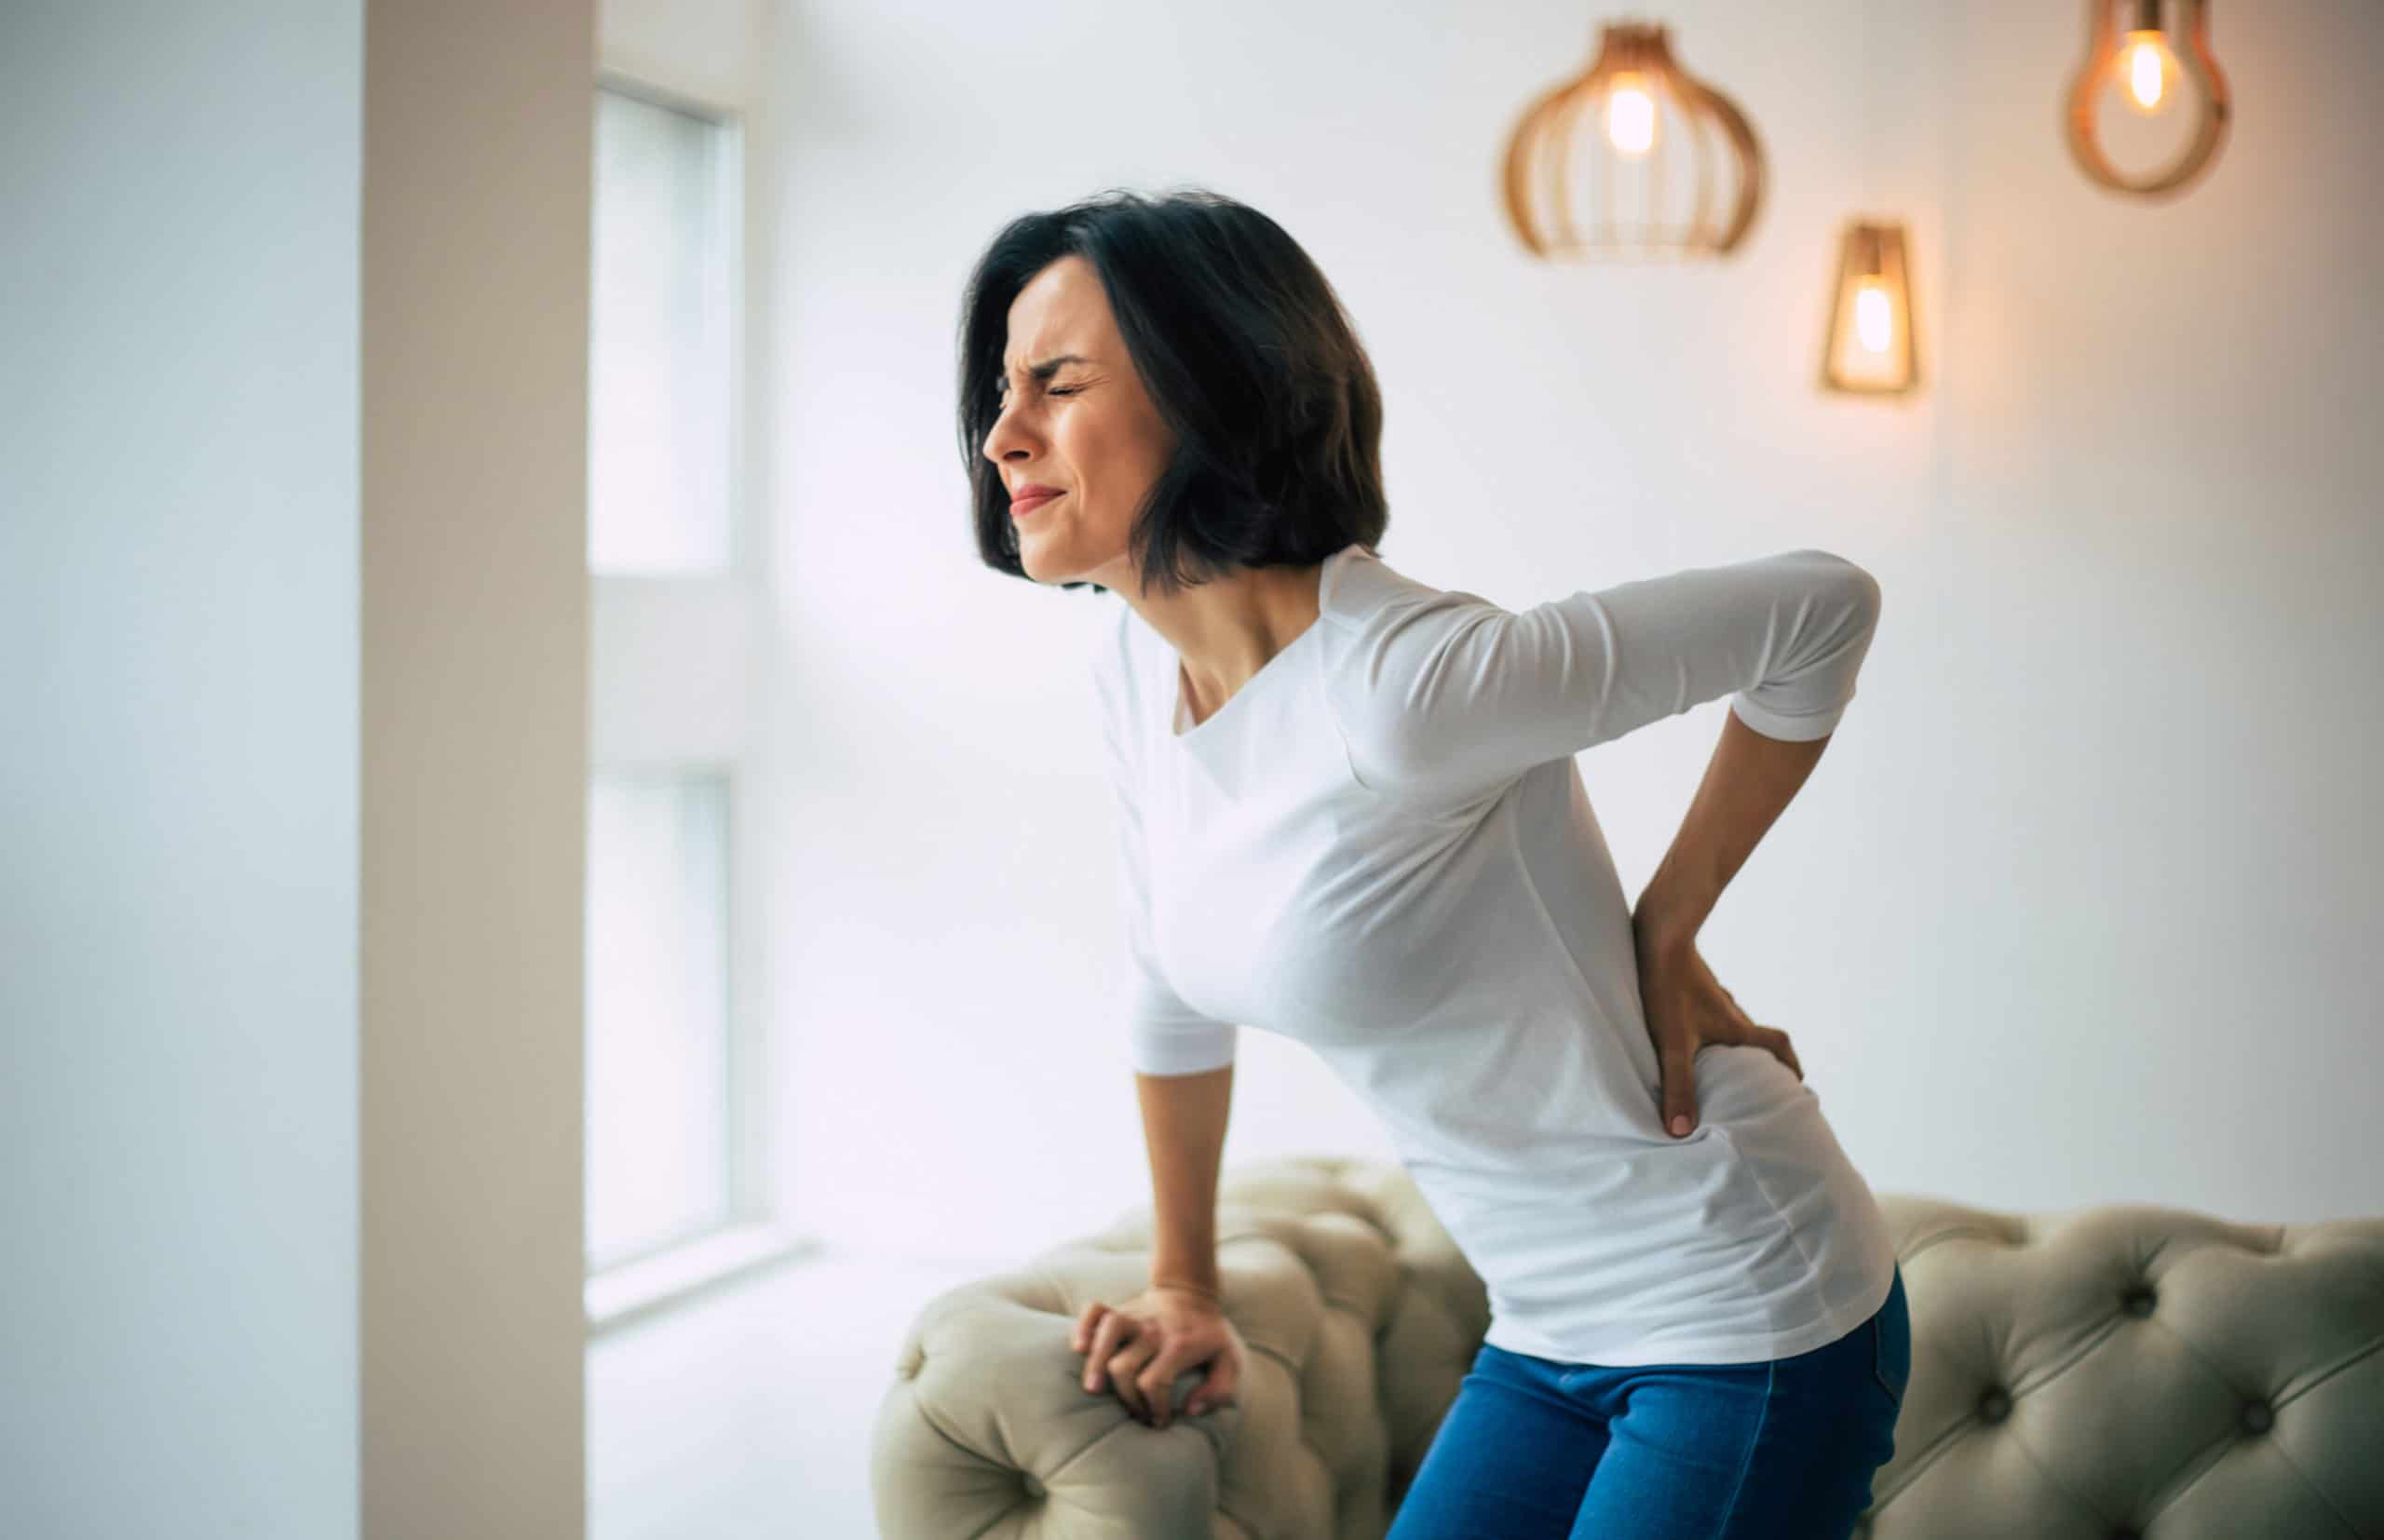 Is a Heating Pad Good for a Herniated Disc?